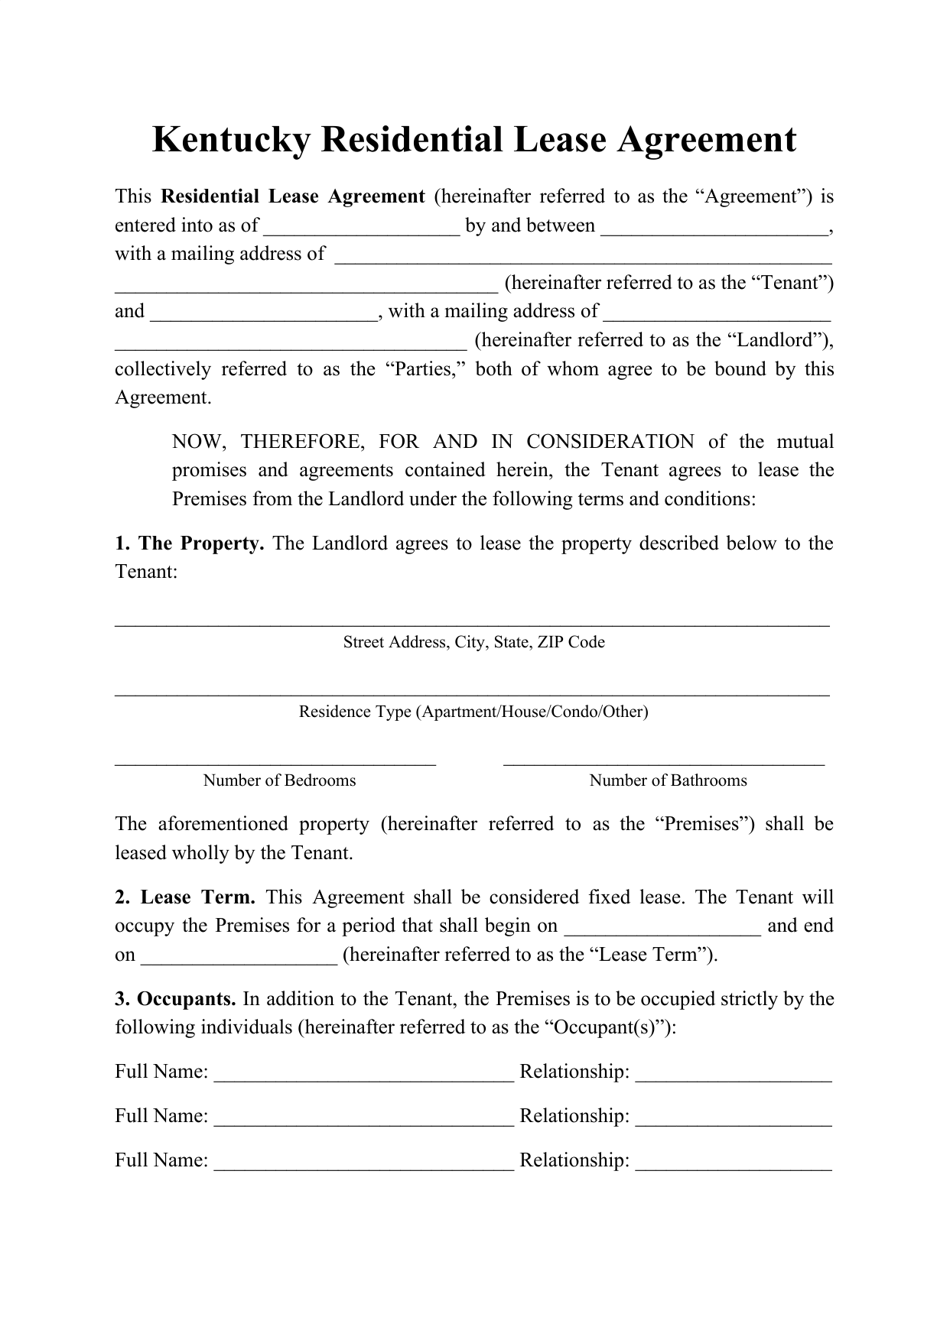 kentucky-residential-lease-agreement-template-fill-out-sign-online